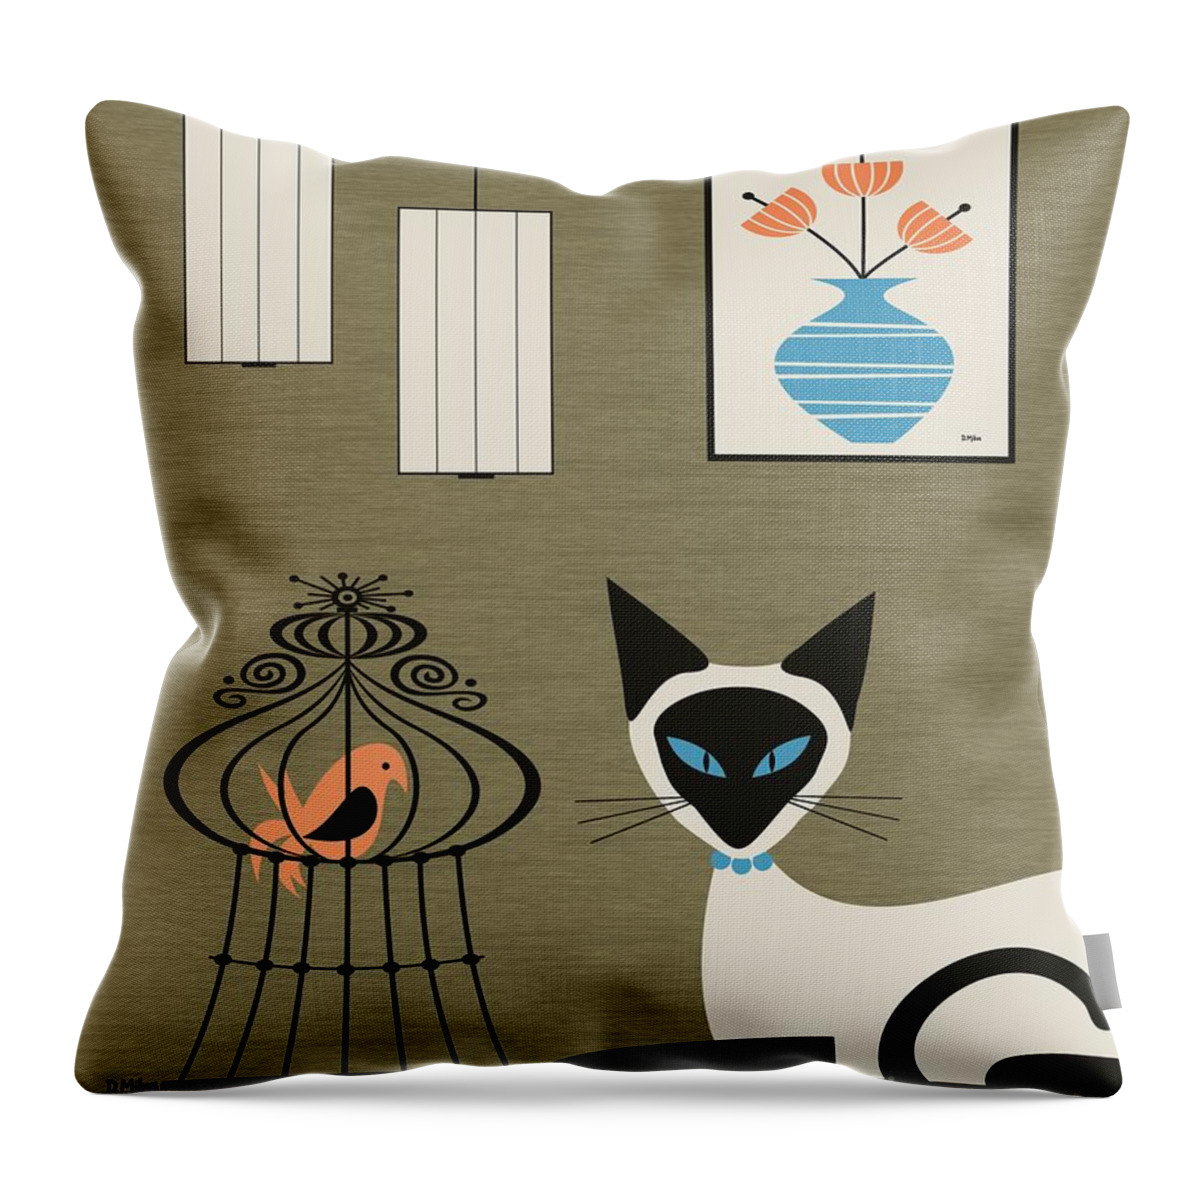 Mid Century Modern Throw Pillow featuring the digital art Tabletop Siamese with Bird by Donna Mibus